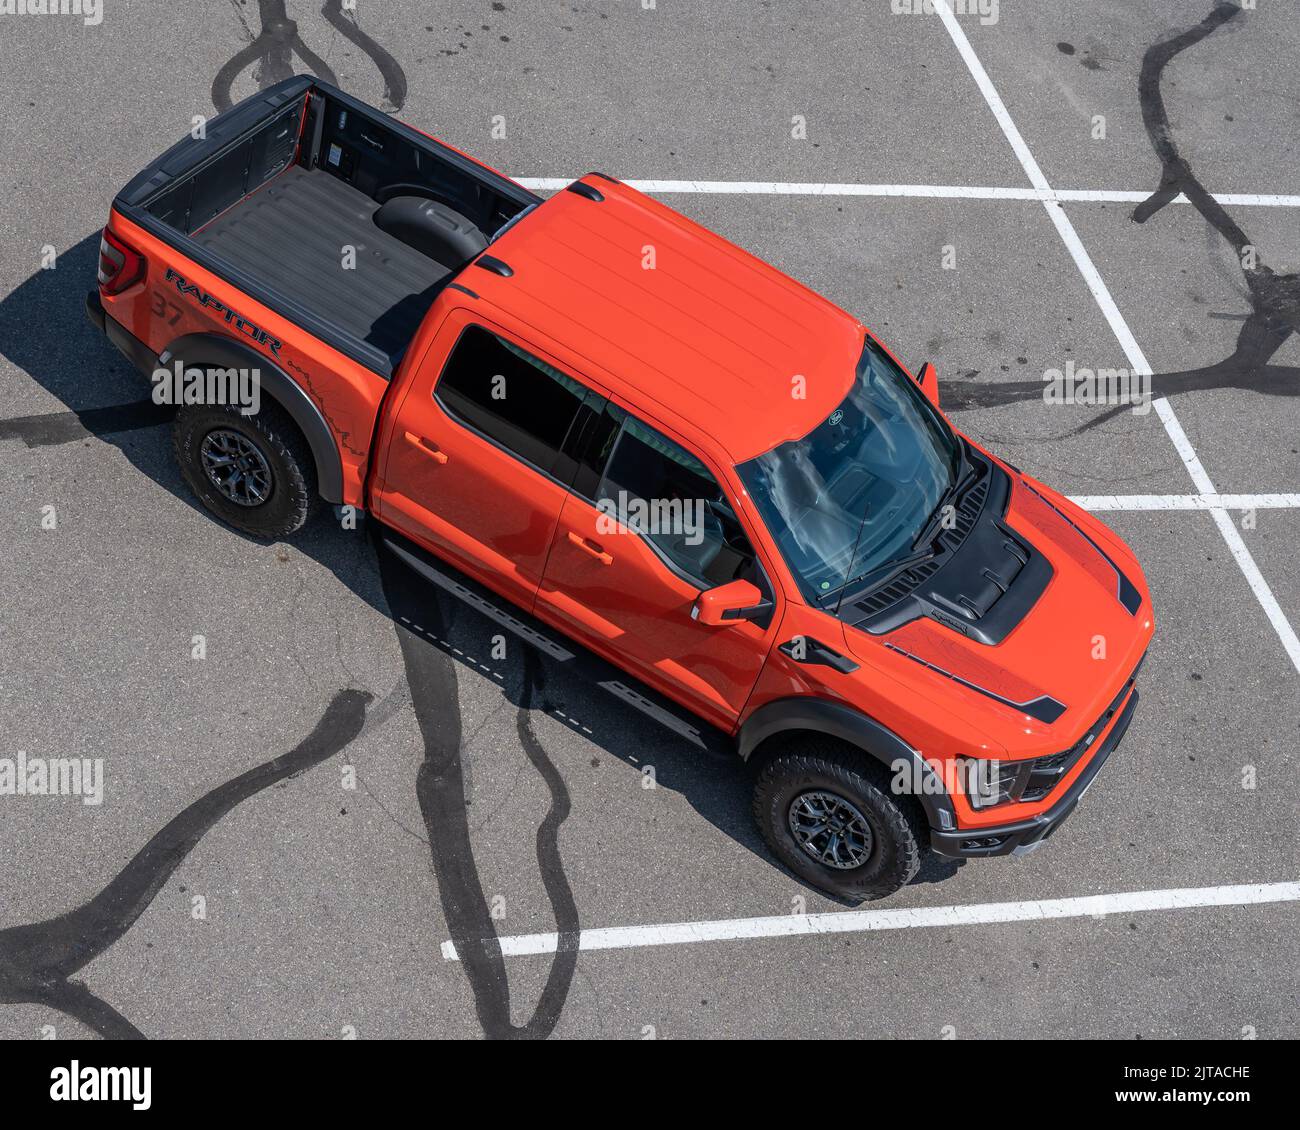 ROYAL OAK, MI/USA - AUGUST 19, 2022: A 2022 Ford F-150 Raptor car at the Ford exhibit on the Woodward Dream Cruise route. Stock Photo